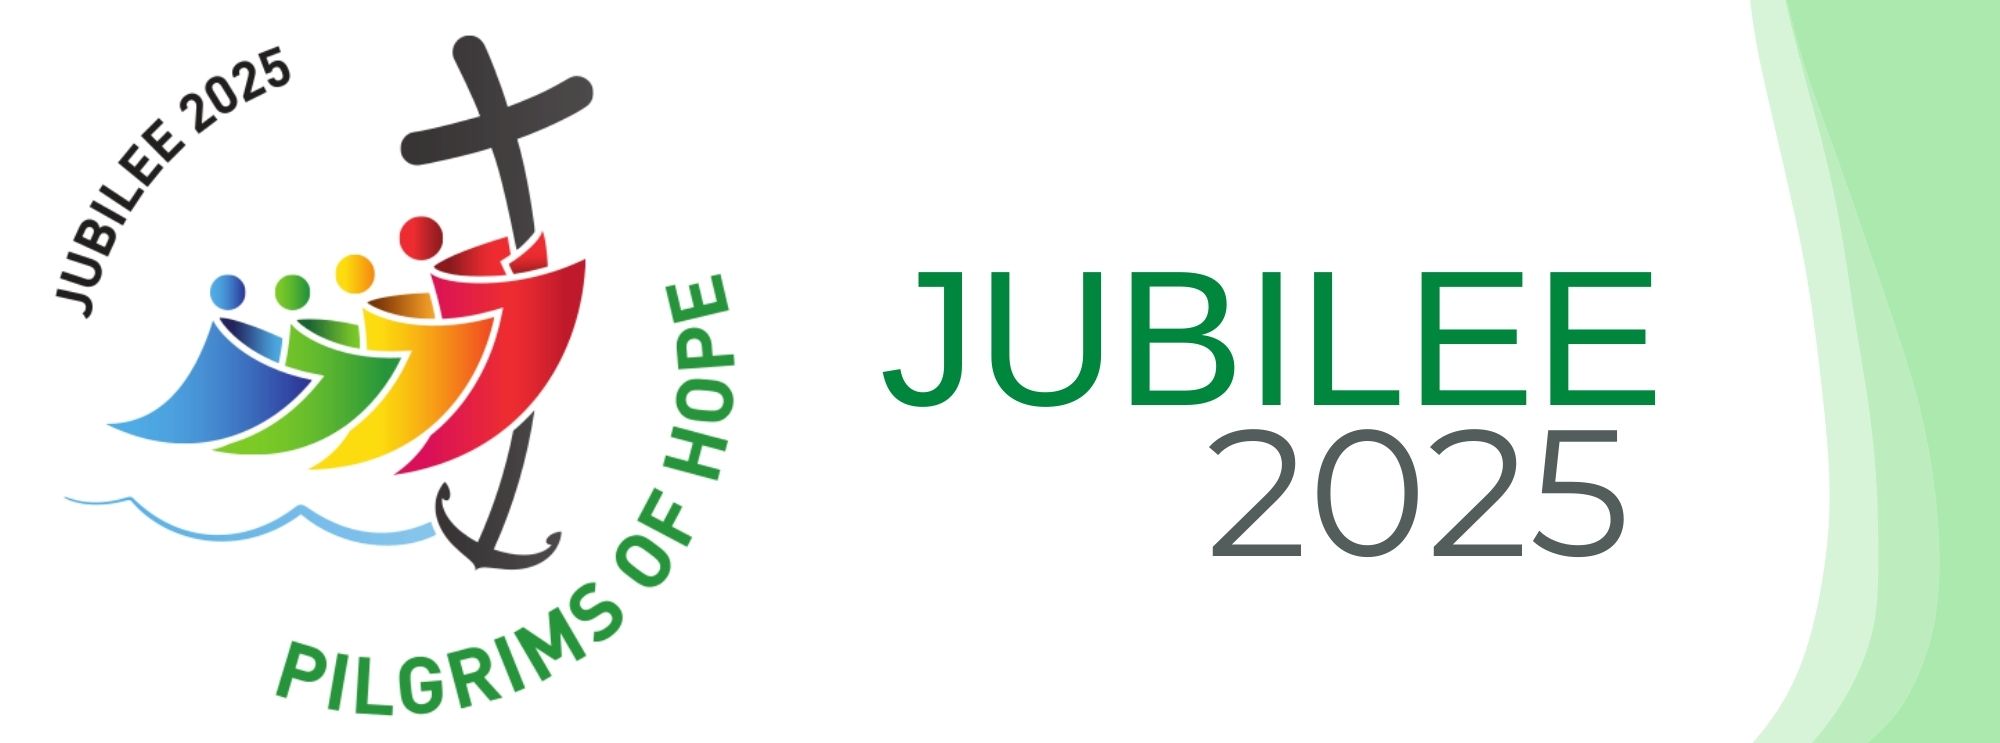 Consignment and reading of the Bull of Indiction for the Jubilee 2025